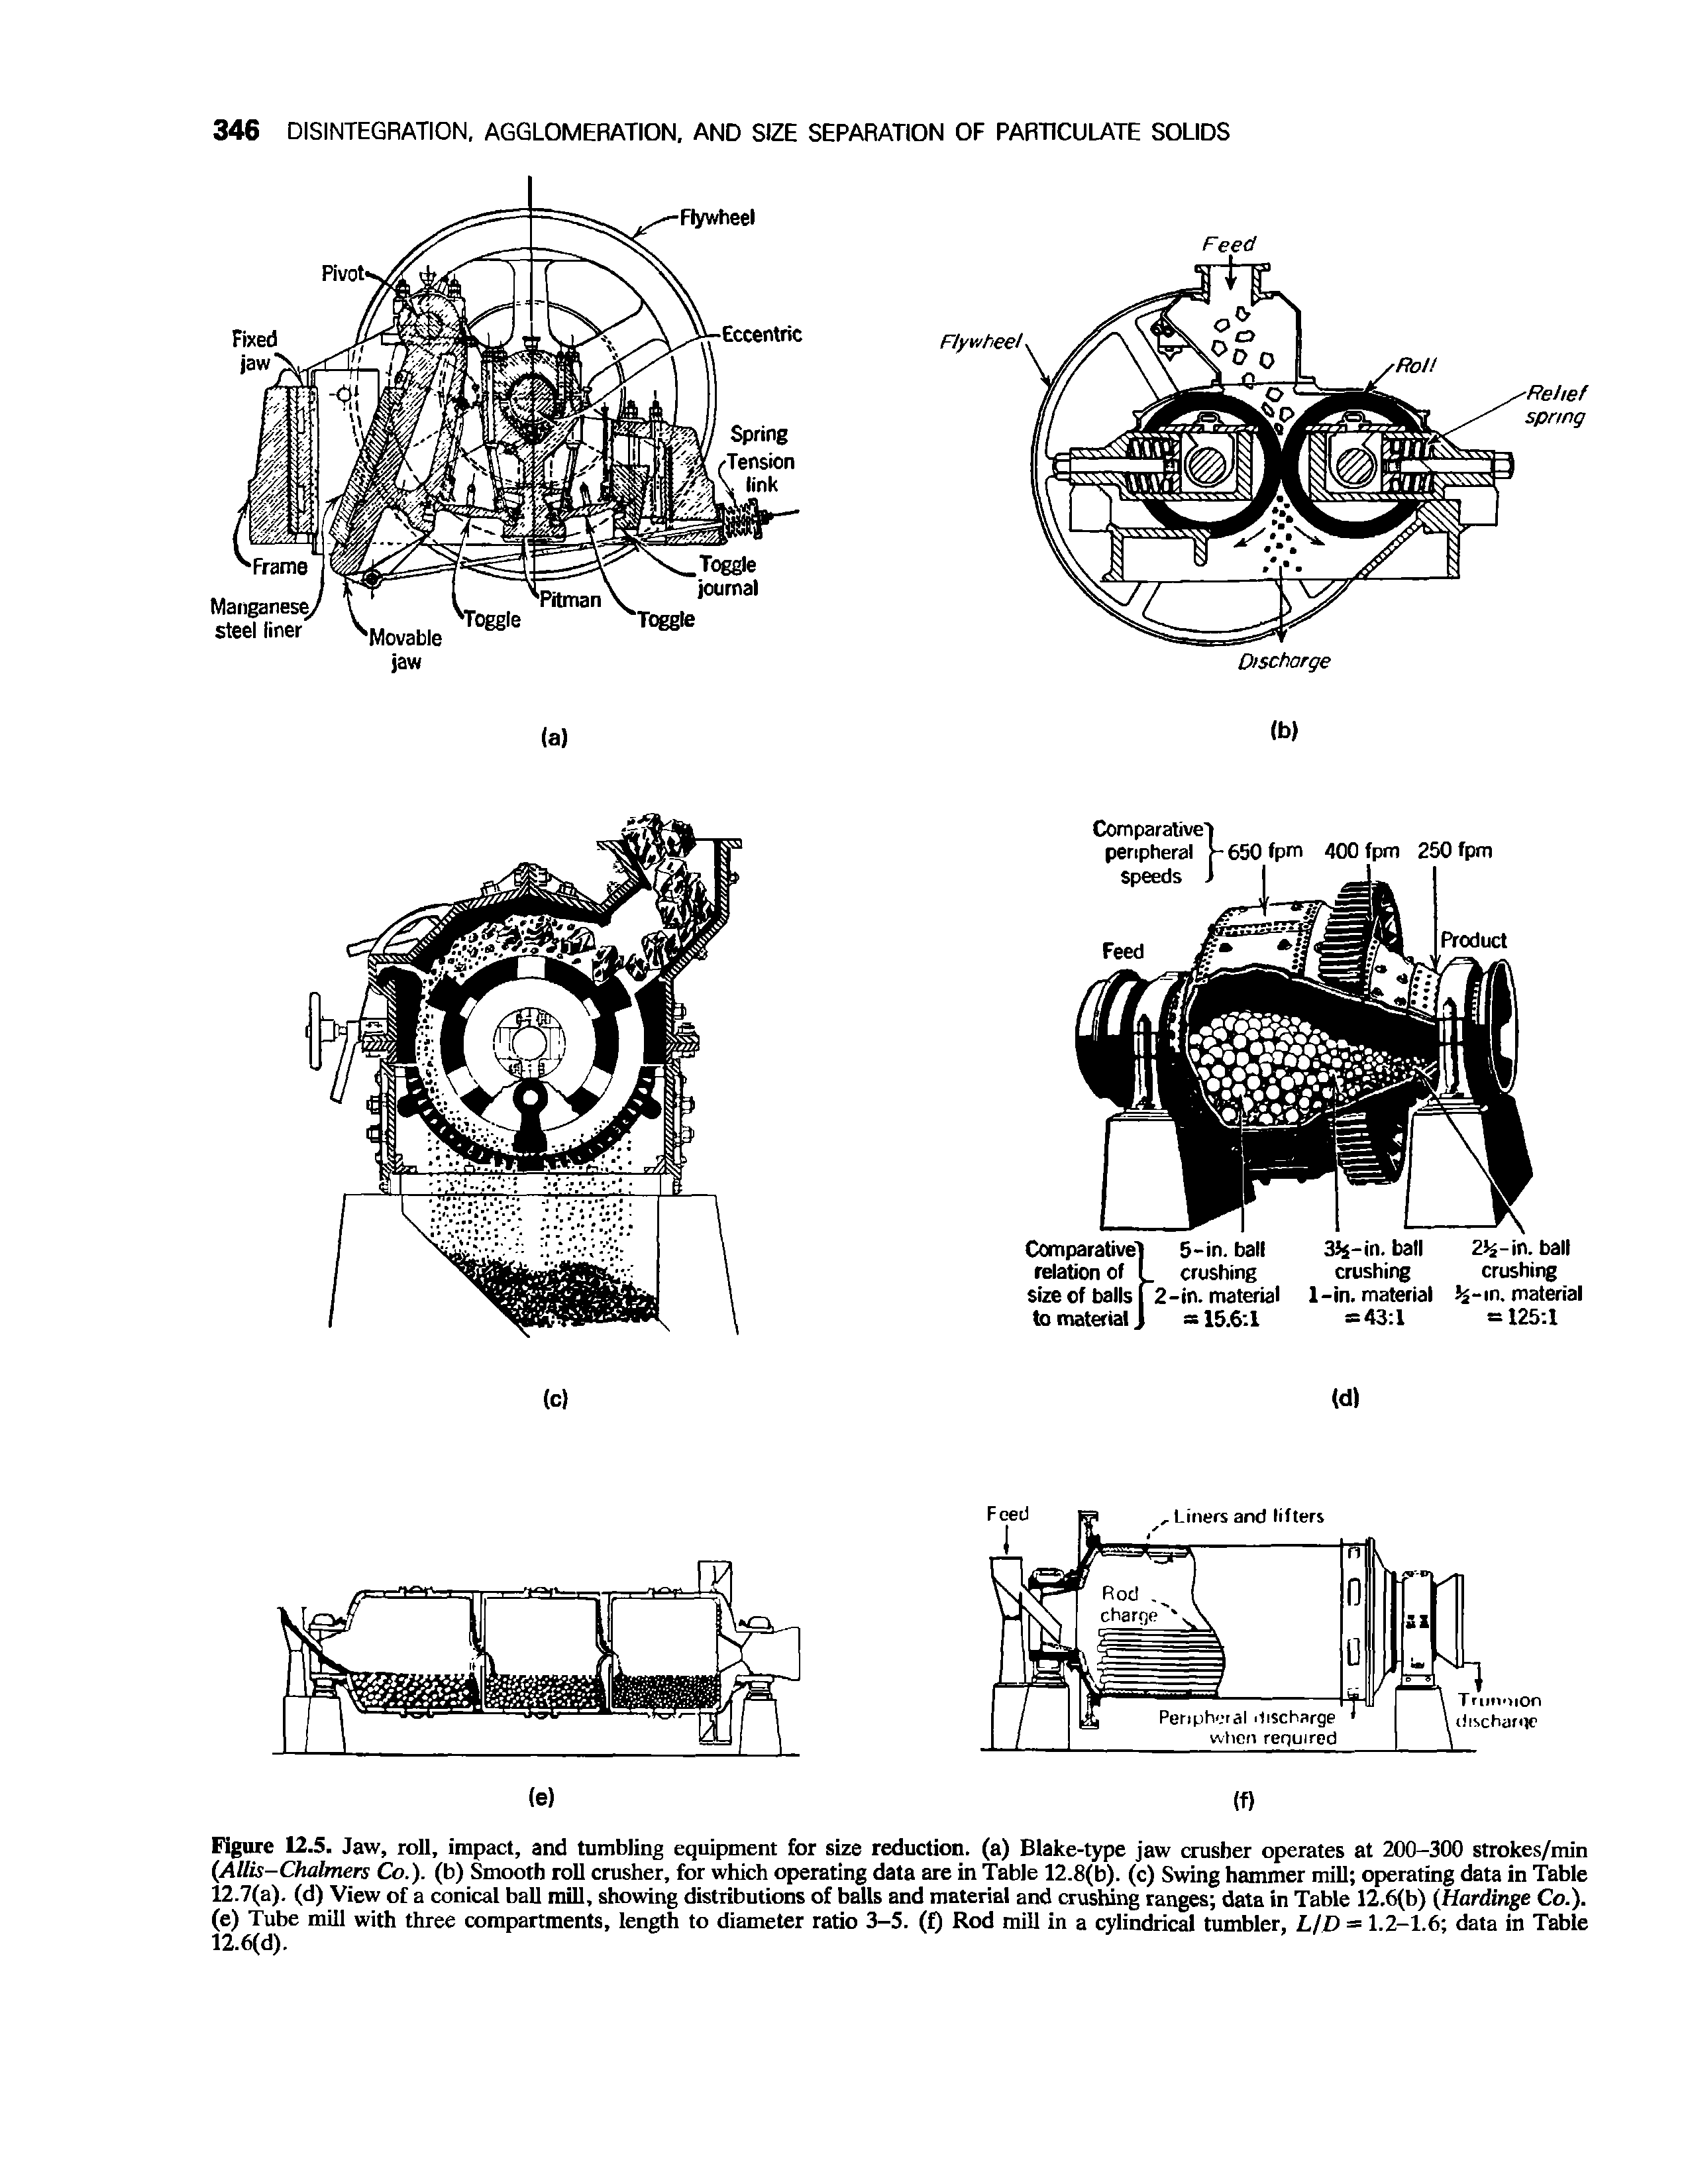 Figure 12.5. Jaw, roll, impact, and tumbling equipment for size reduction, (a) Blake-type jaw crusher operates at 200-300 strokes/min (Allis-Chalmers Co.), (b) Smooth roll crusher, for which operating data are in Table 12.8(b). (c) Swing hammer mill operating data in Table 12.7(a). (d) View of a conical ball mill, showing distributions of balls and material and crusting ranges data in Table 12.6(b) (Hardinge Co.). (e) Tube mill with three compartments, length to diameter ratio 3-5. (f) Rod mill in a cylindrical tumbler, LID = 1.2-1.6 data in Table 12.6(d).